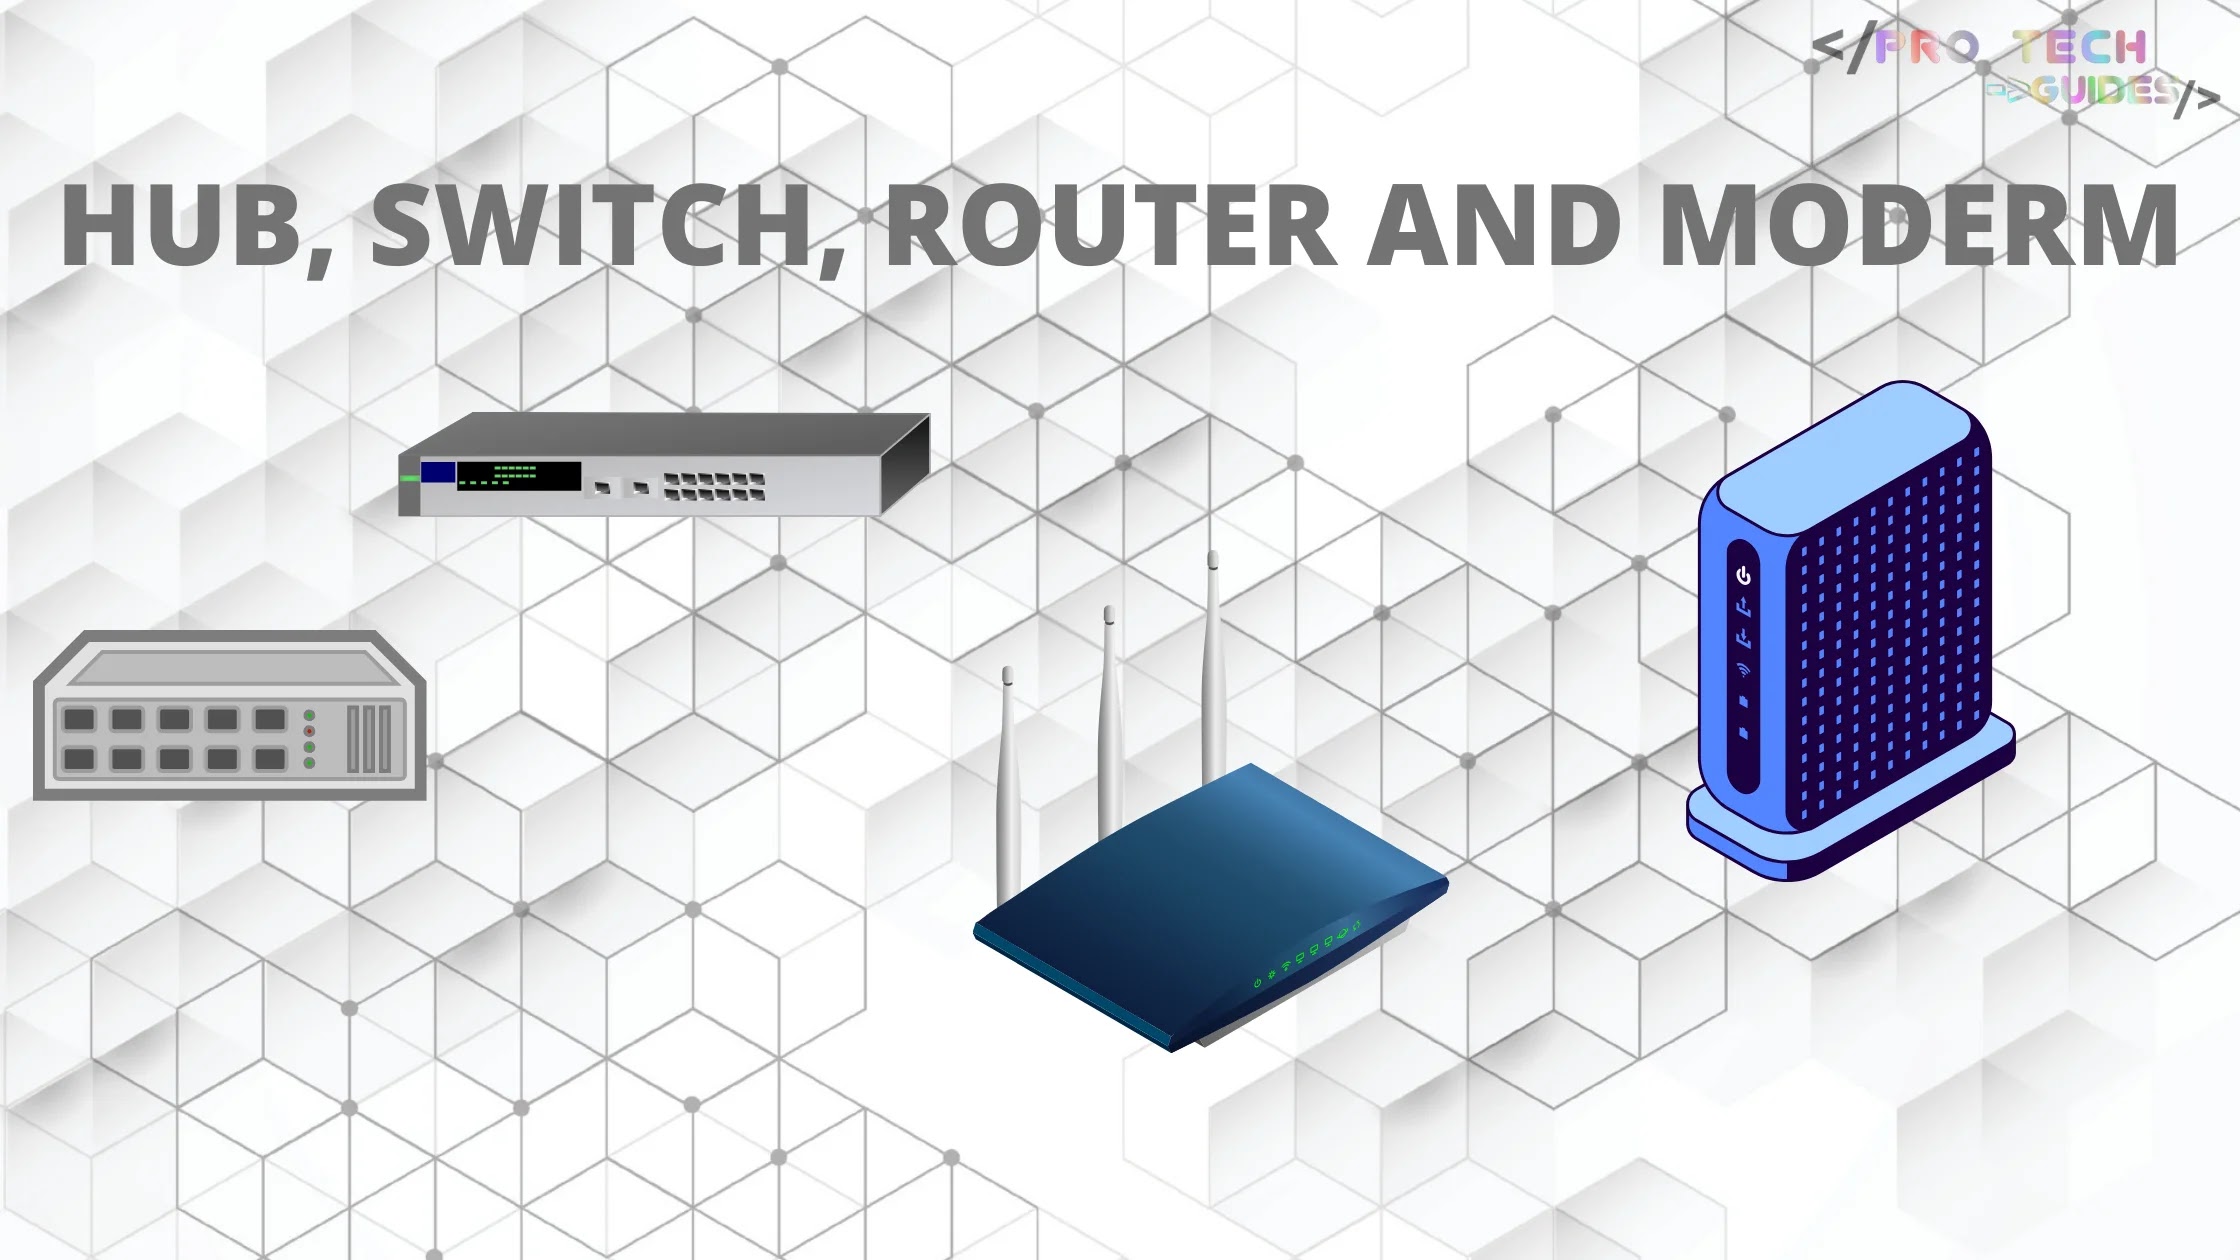 Networking device hub, switch, router and modem